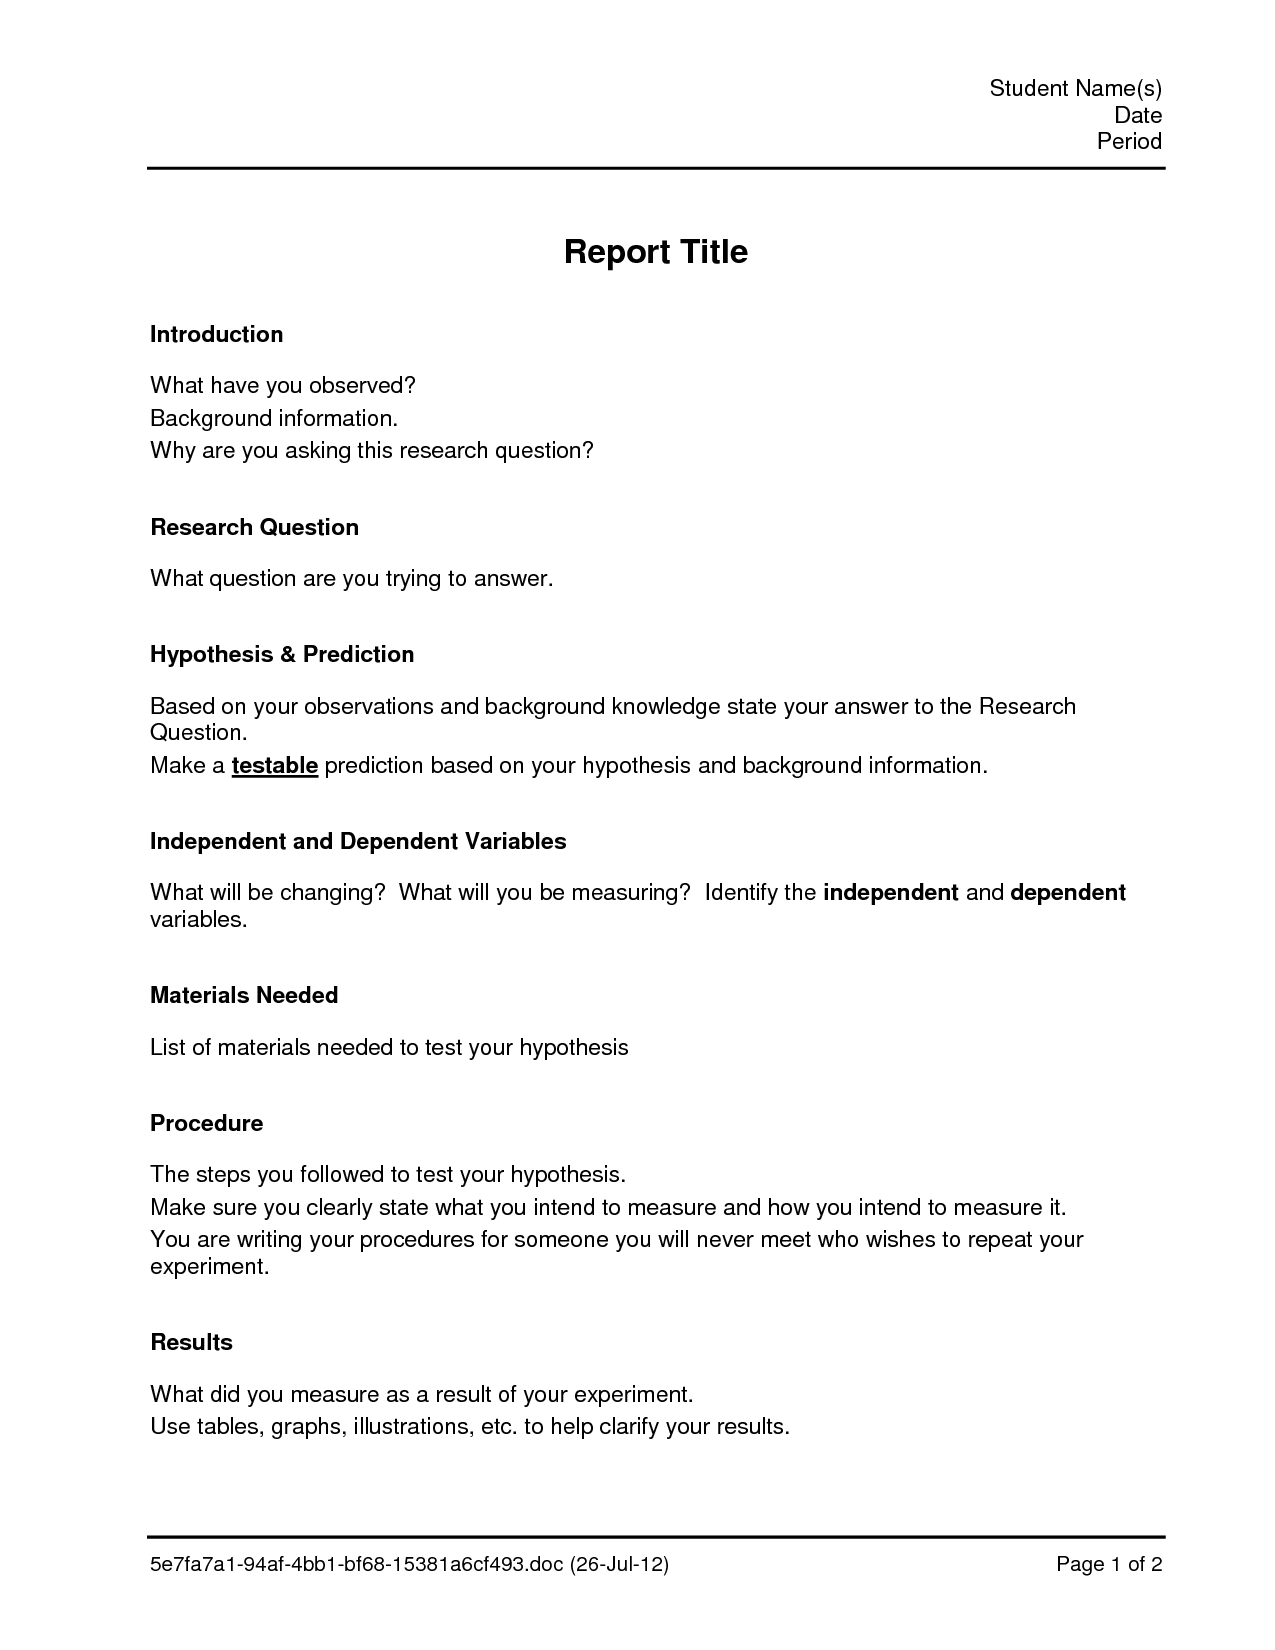 Lab Report Template | E Commercewordpress Pertaining To Lab Report Template Word